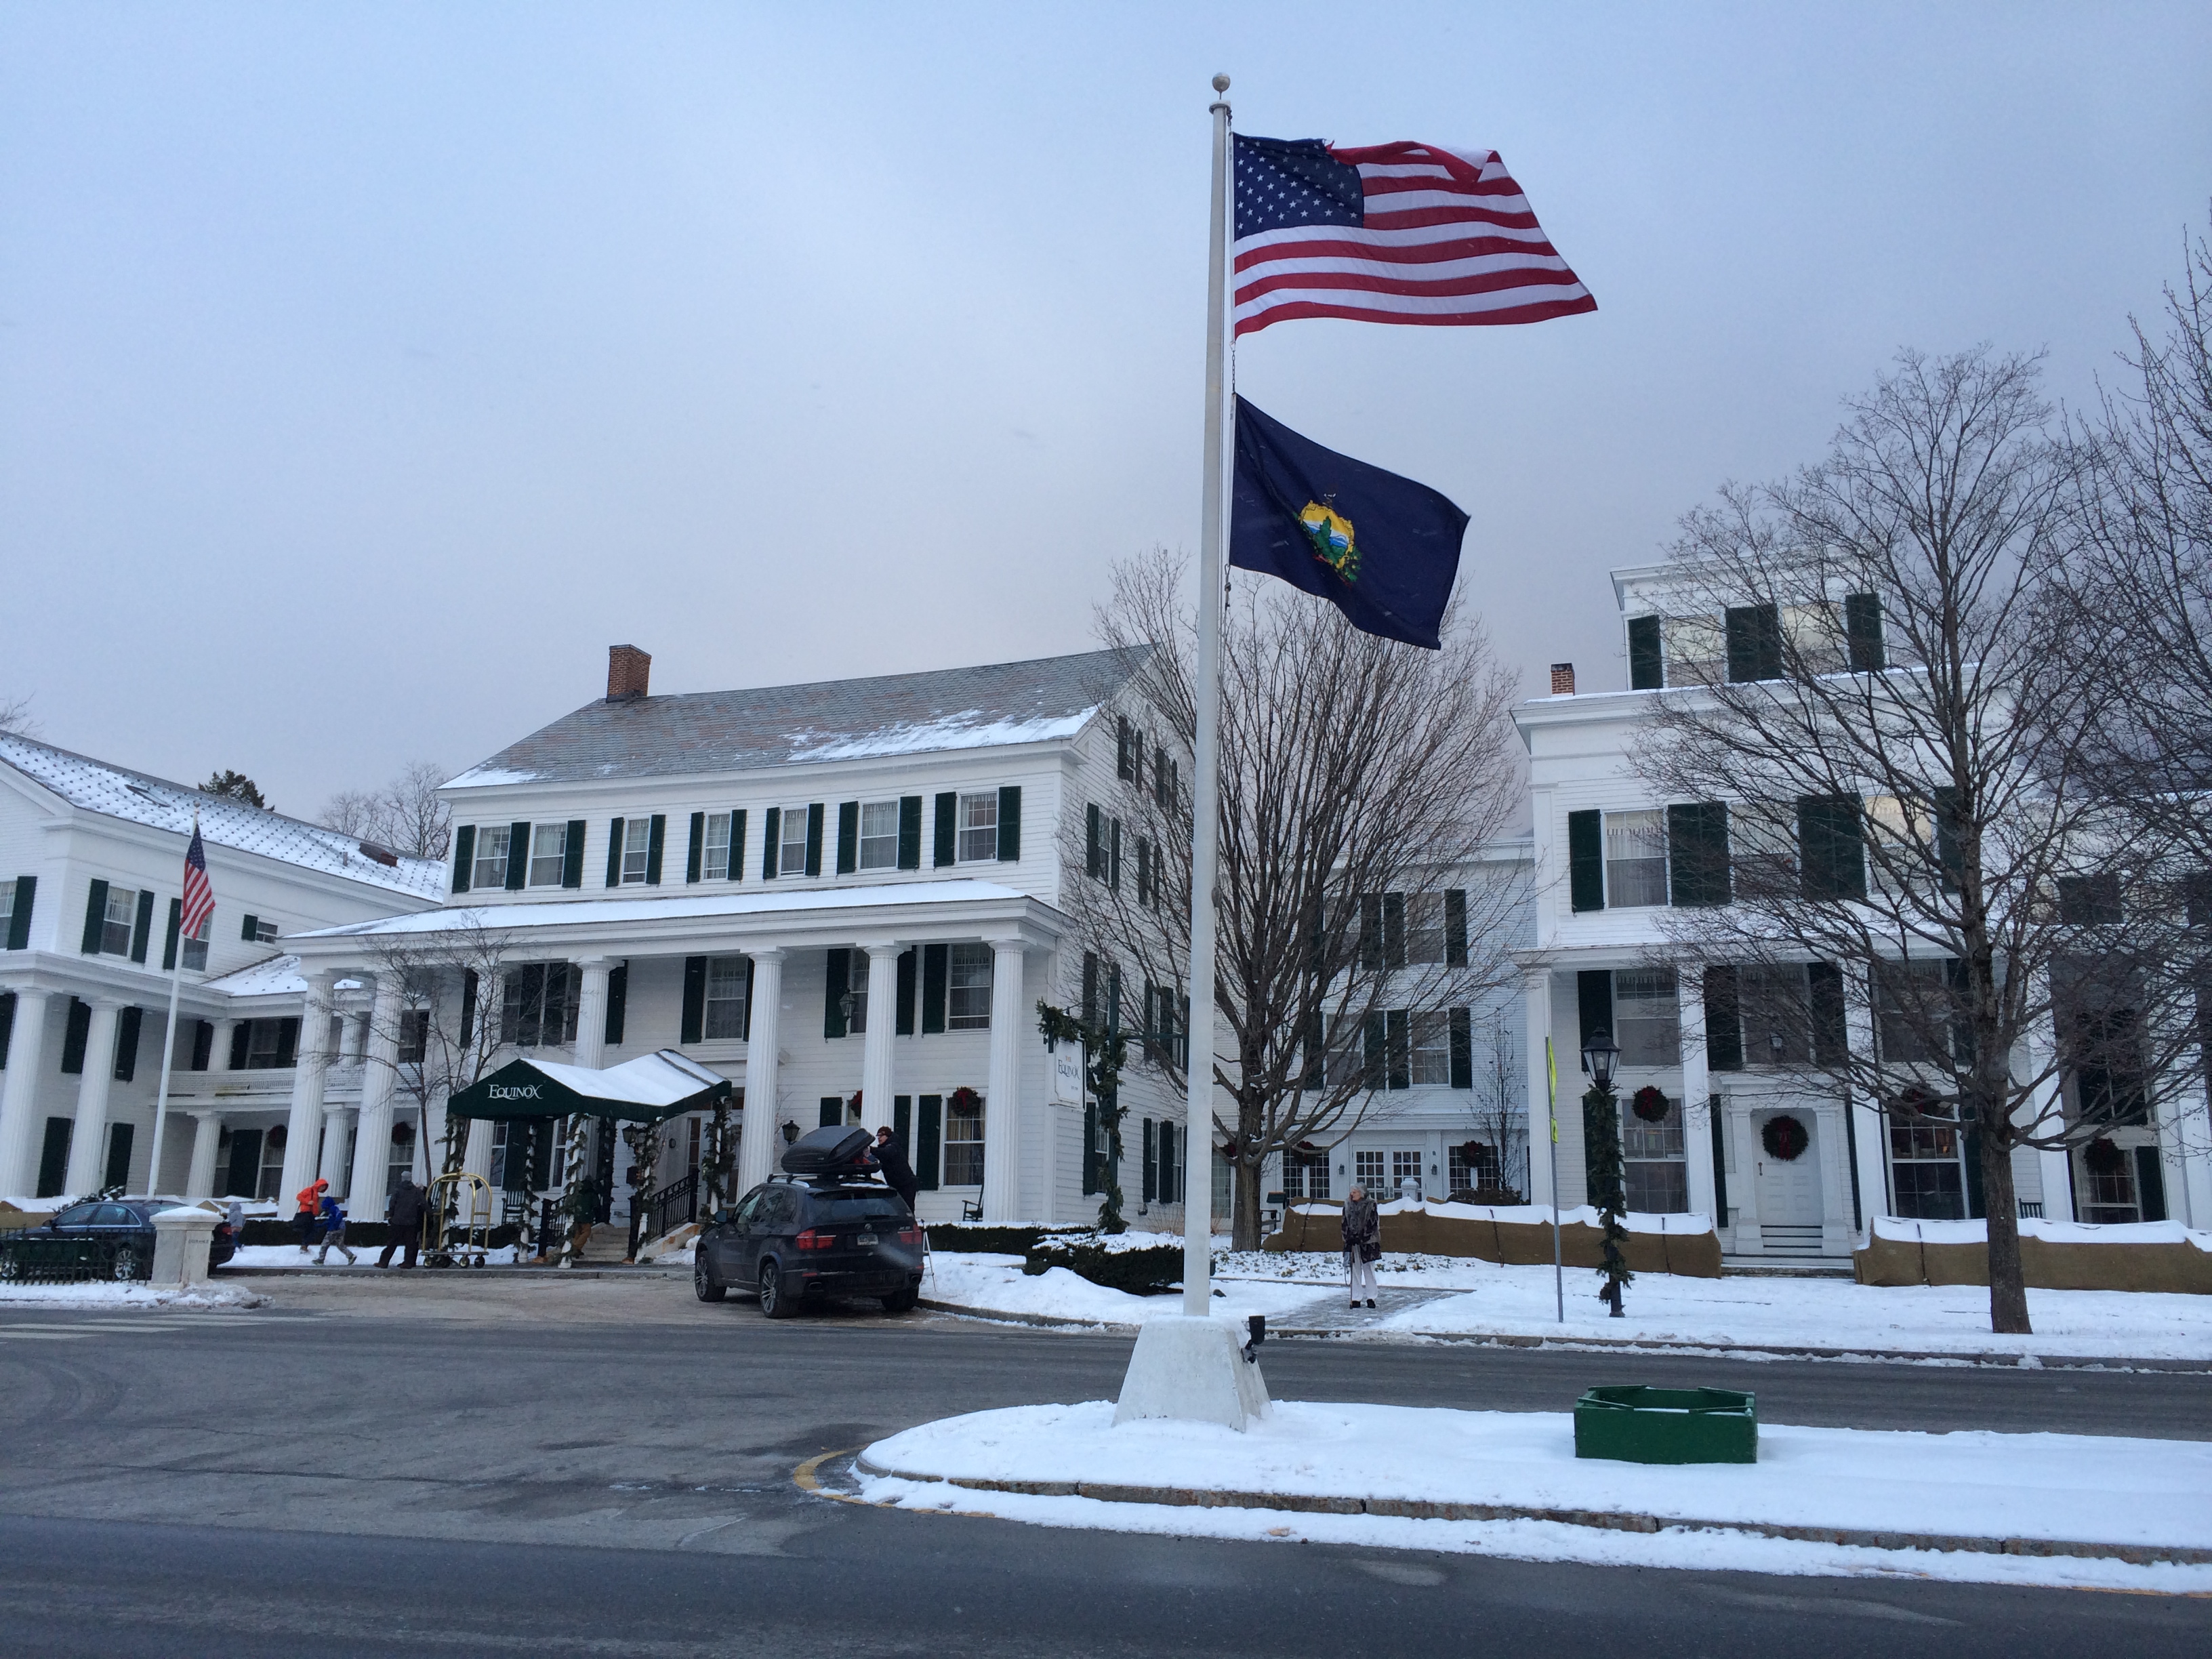 Winter At Equinox Resort In Vermont: Hotel Review